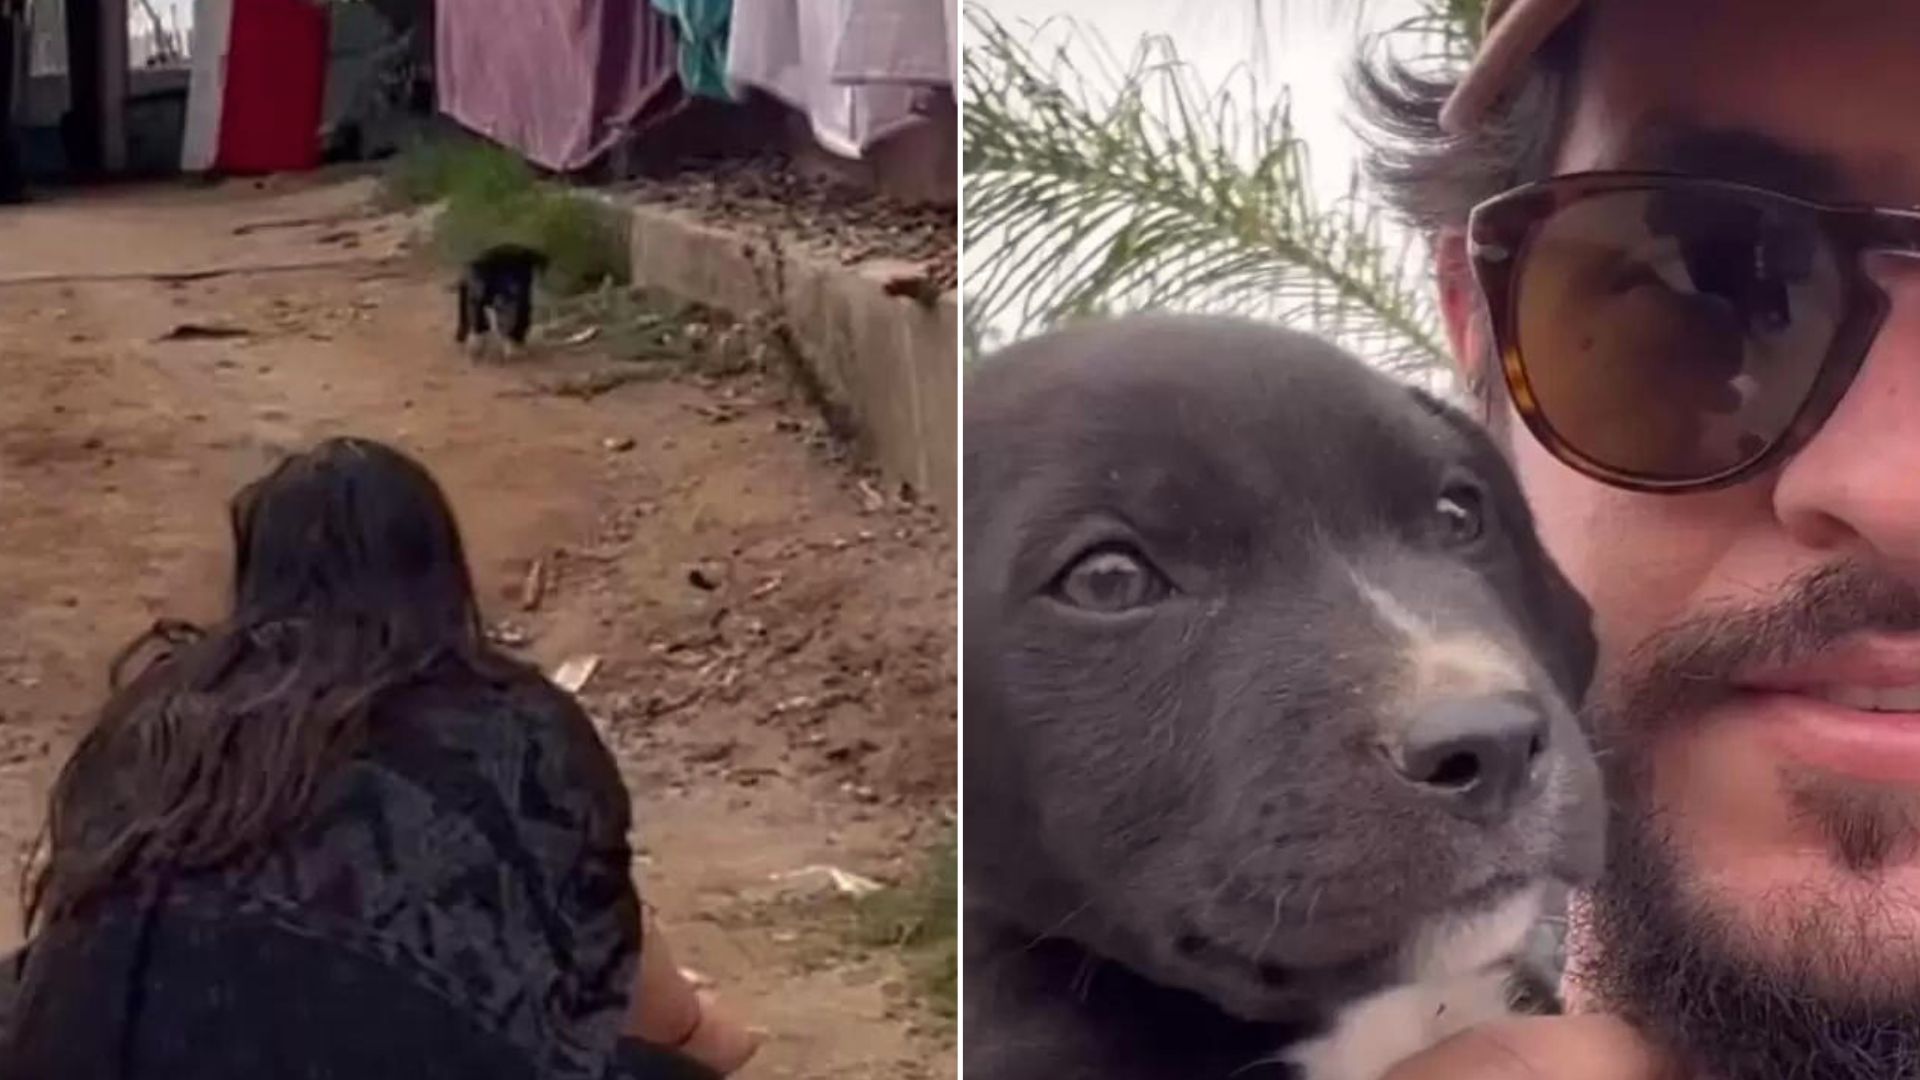 Rescuers See A Little Puppy Crossing A Busy Street And They Know Exactly What They Need To Do